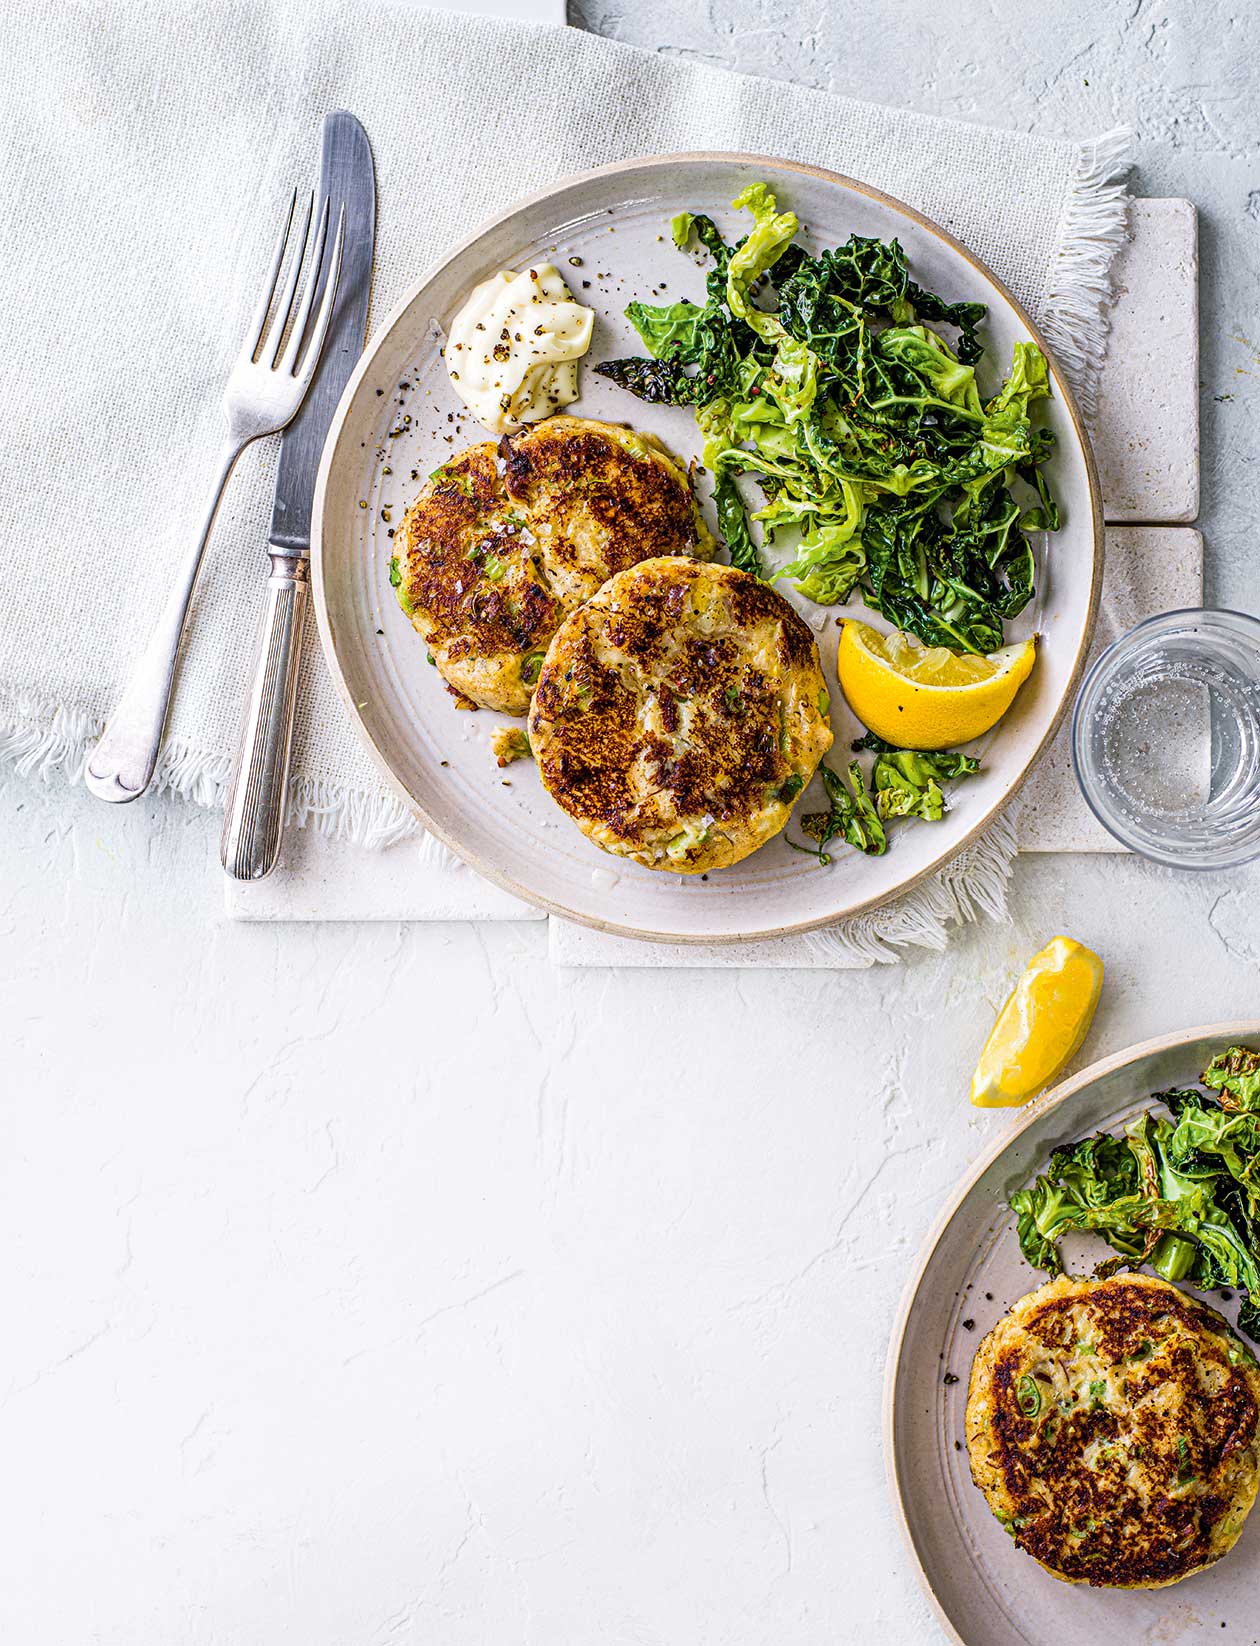 Spicy Fish Cakes | Divinely Delish